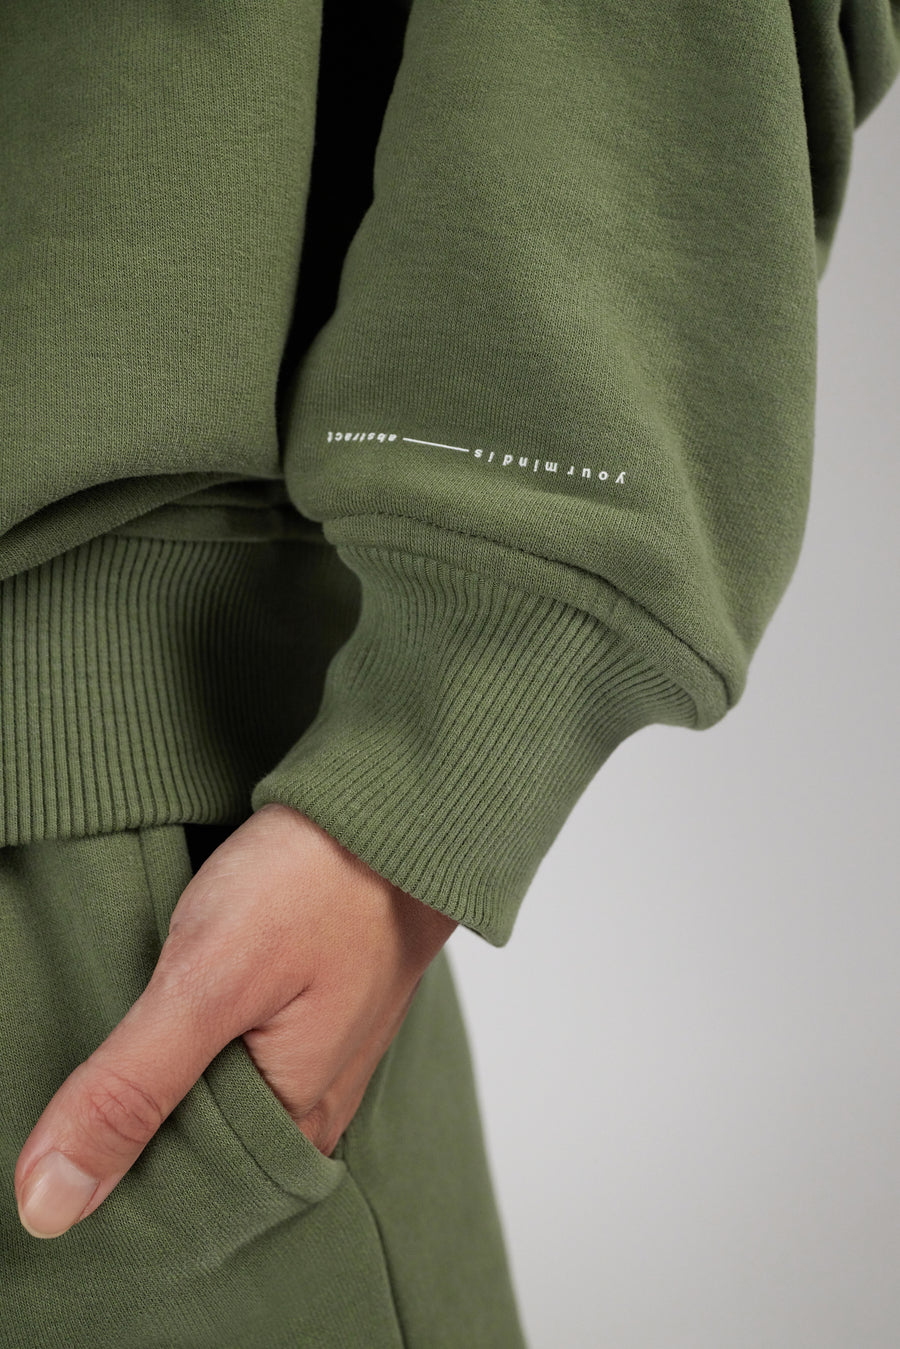 Hoodie in color sage green showing a small wording detail at sleeve